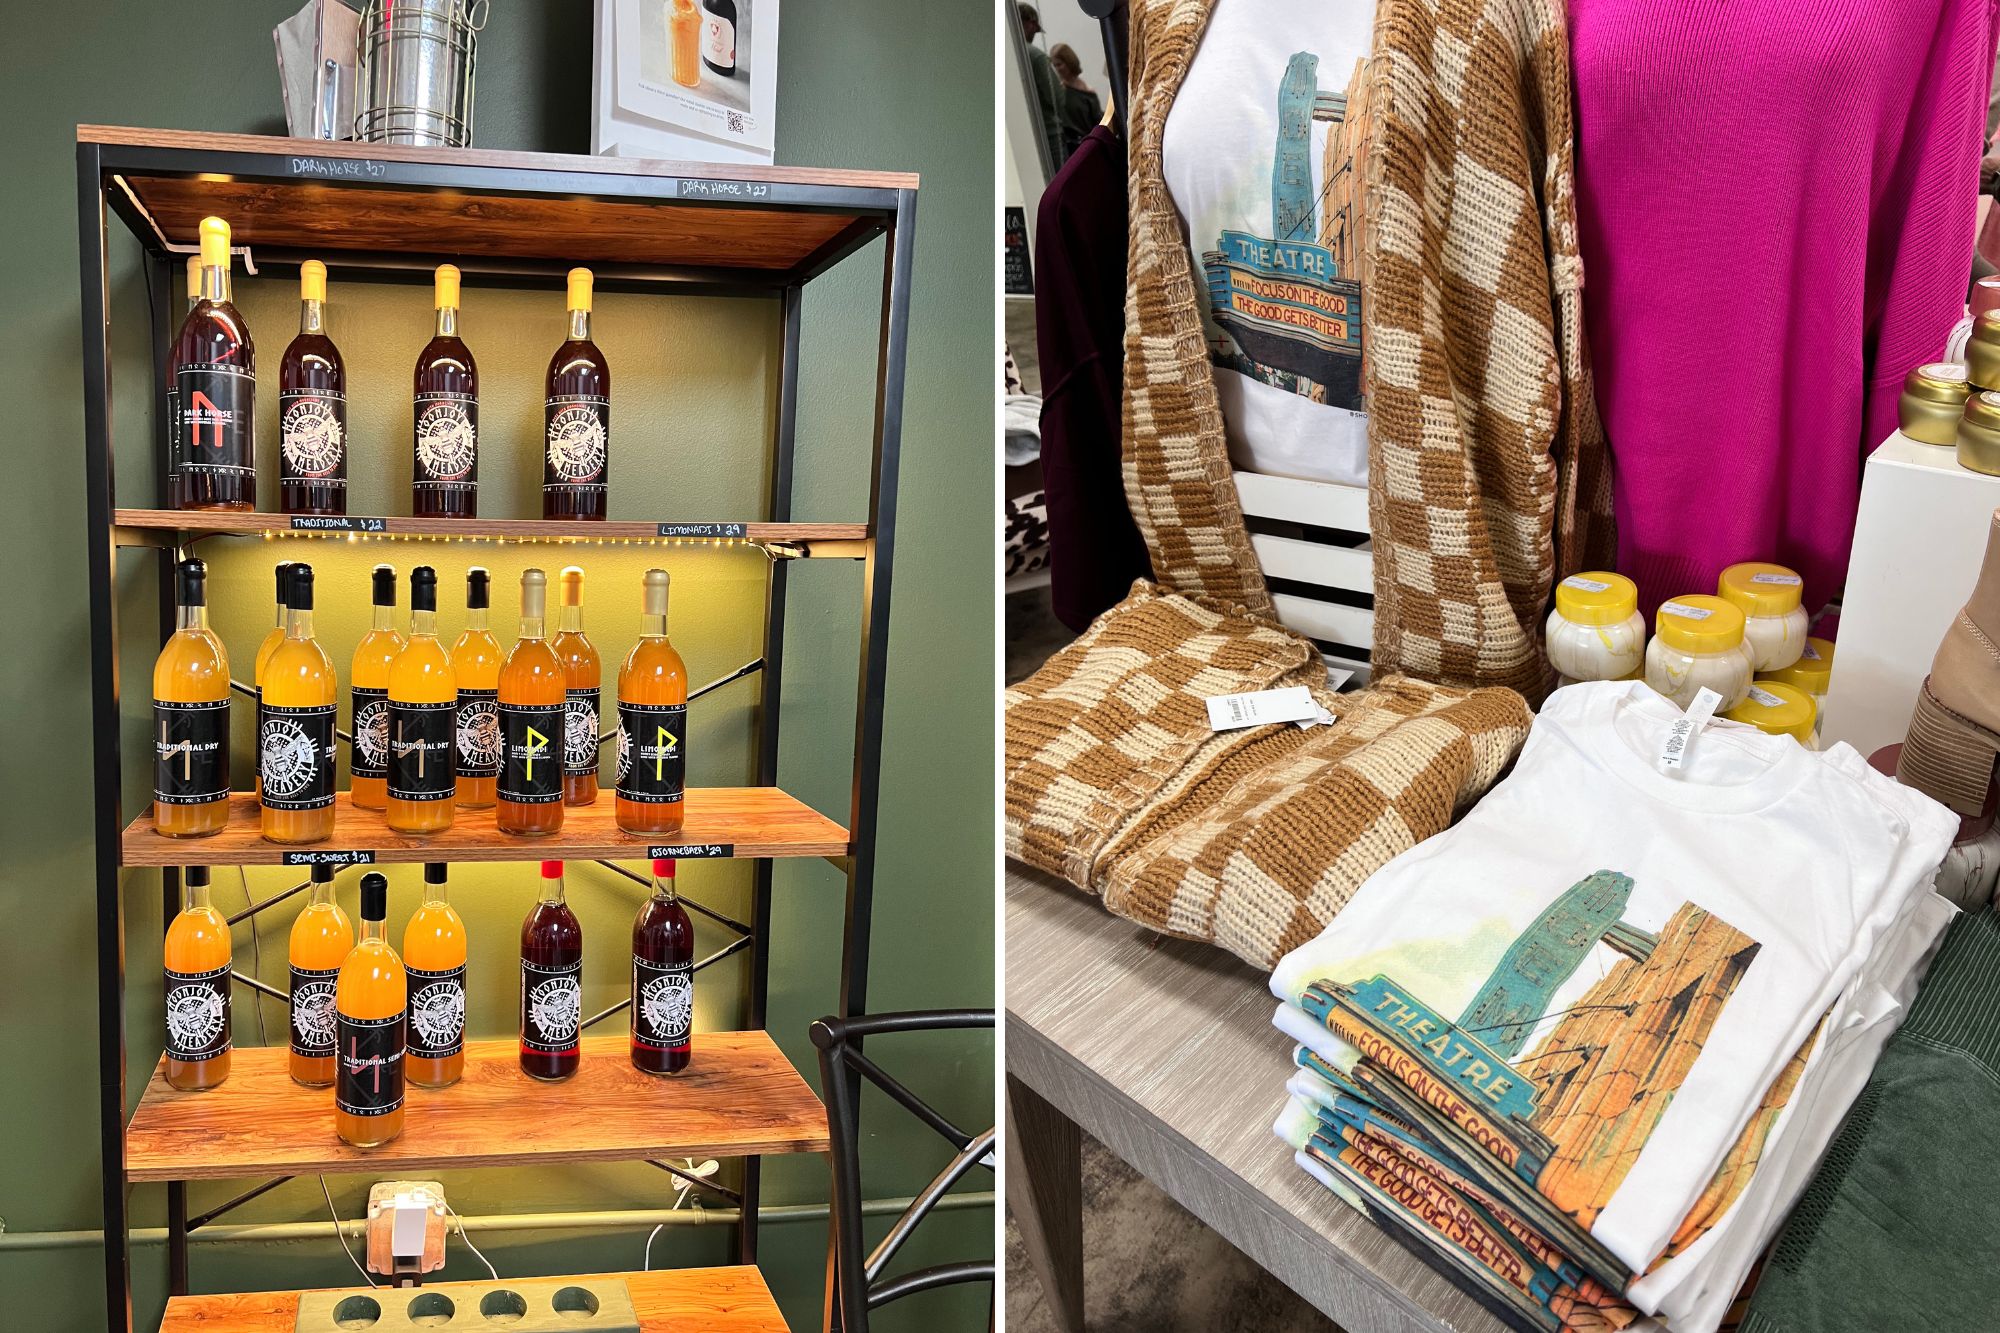 Left: honey at Cannon Honey Mill | Right: clothing at Adair